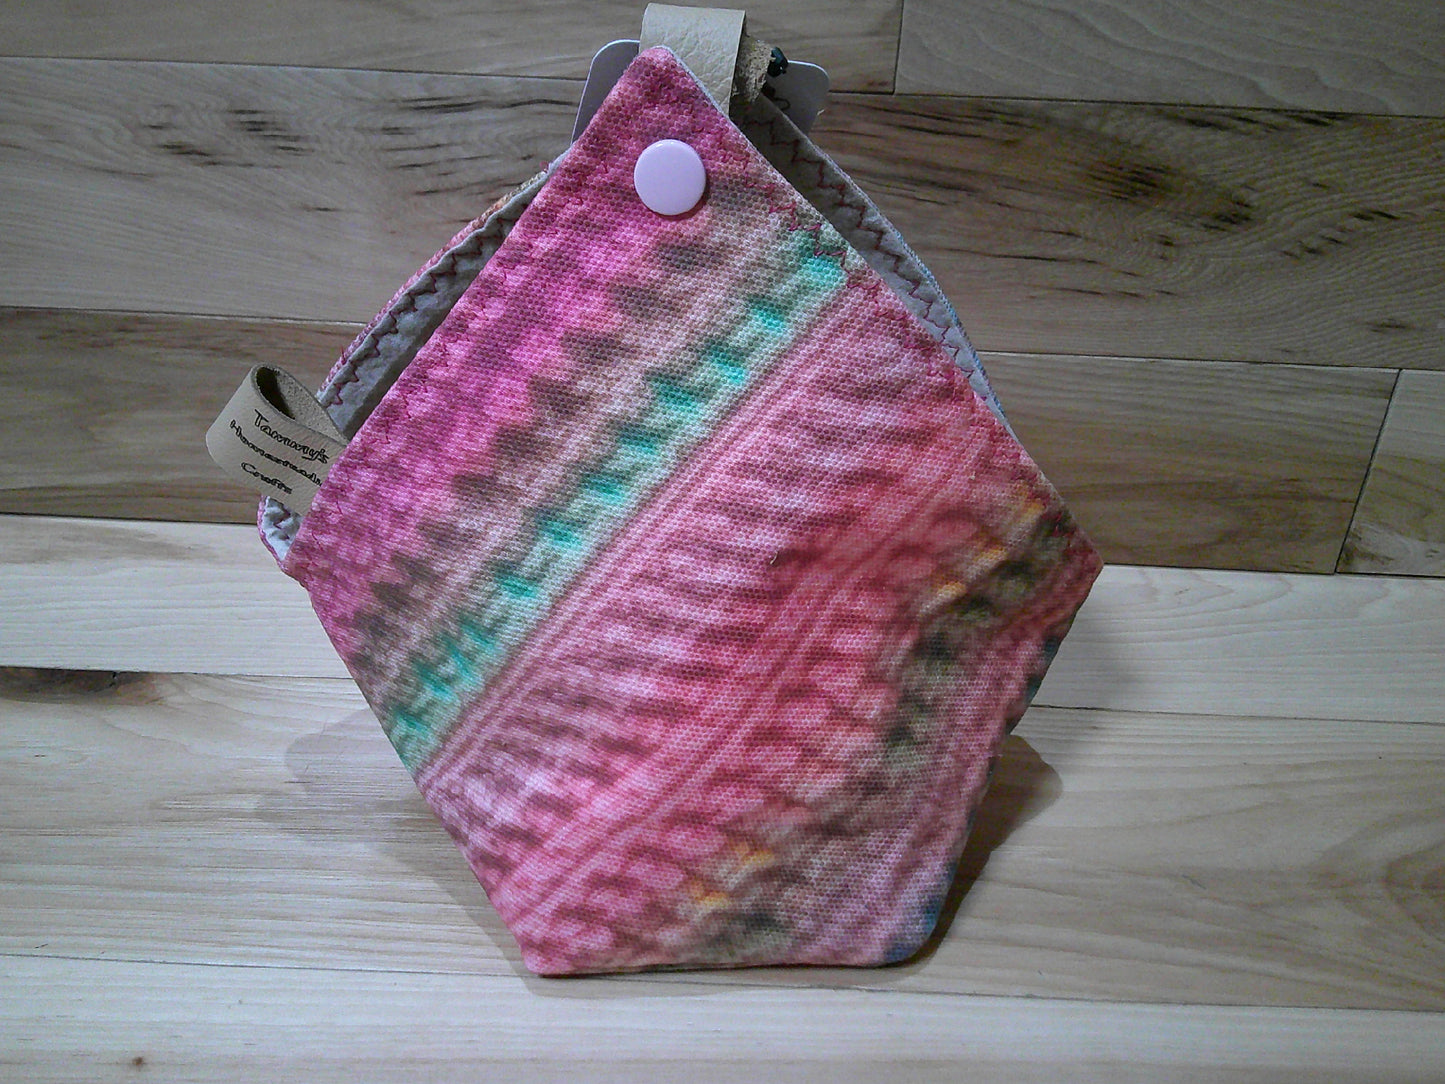 Wrist/ Yarn w/ removeable handle project bags